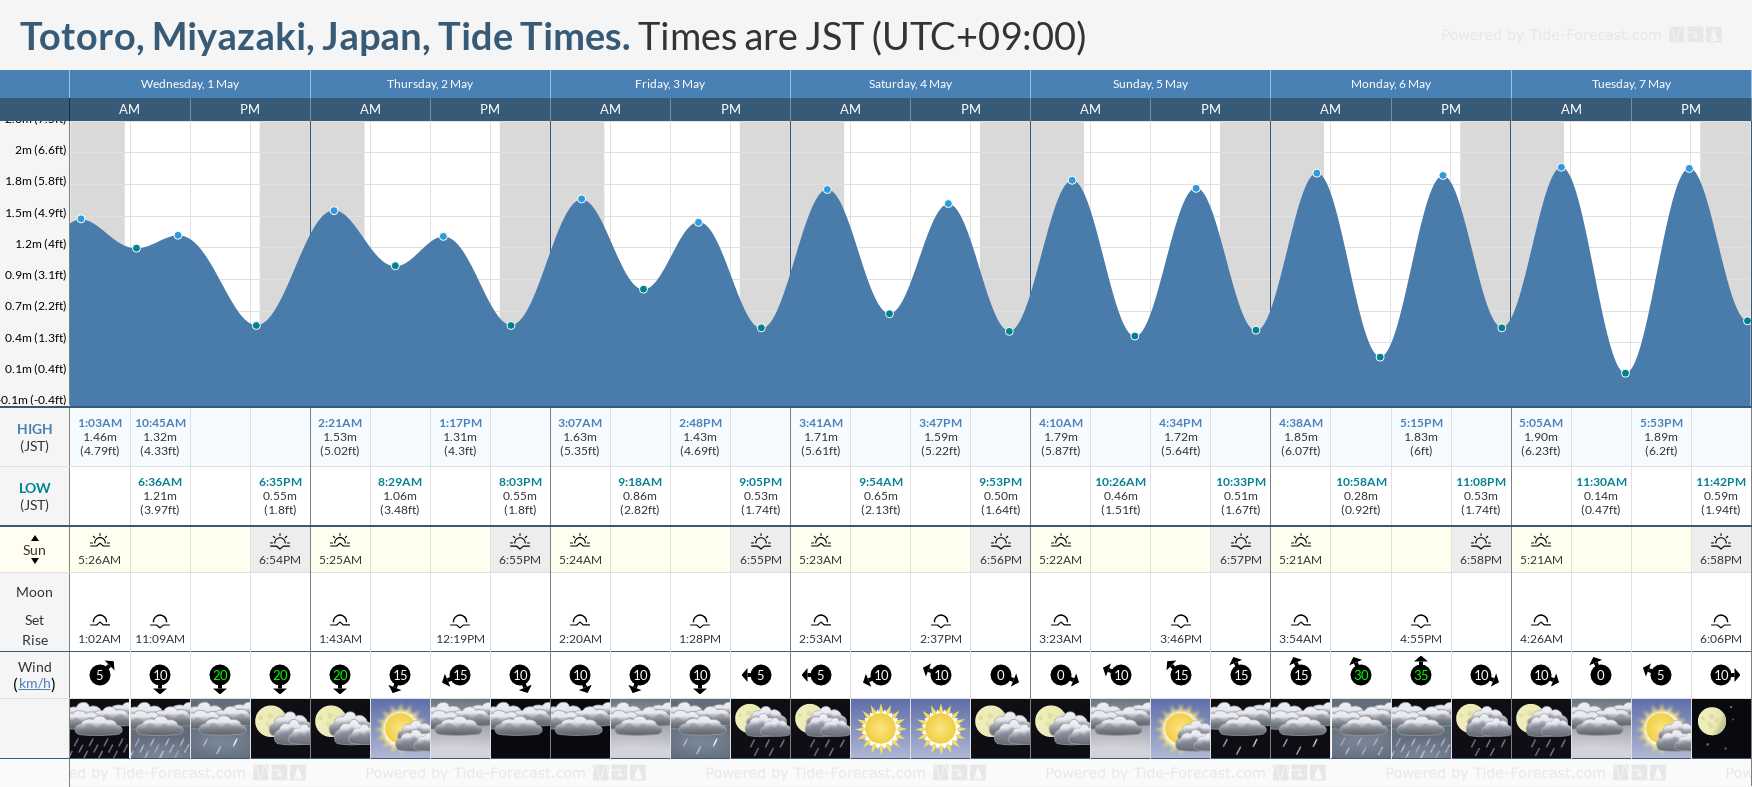 Totoro, Miyazaki, Japan Tide Chart including high and low tide tide times for the next 7 days